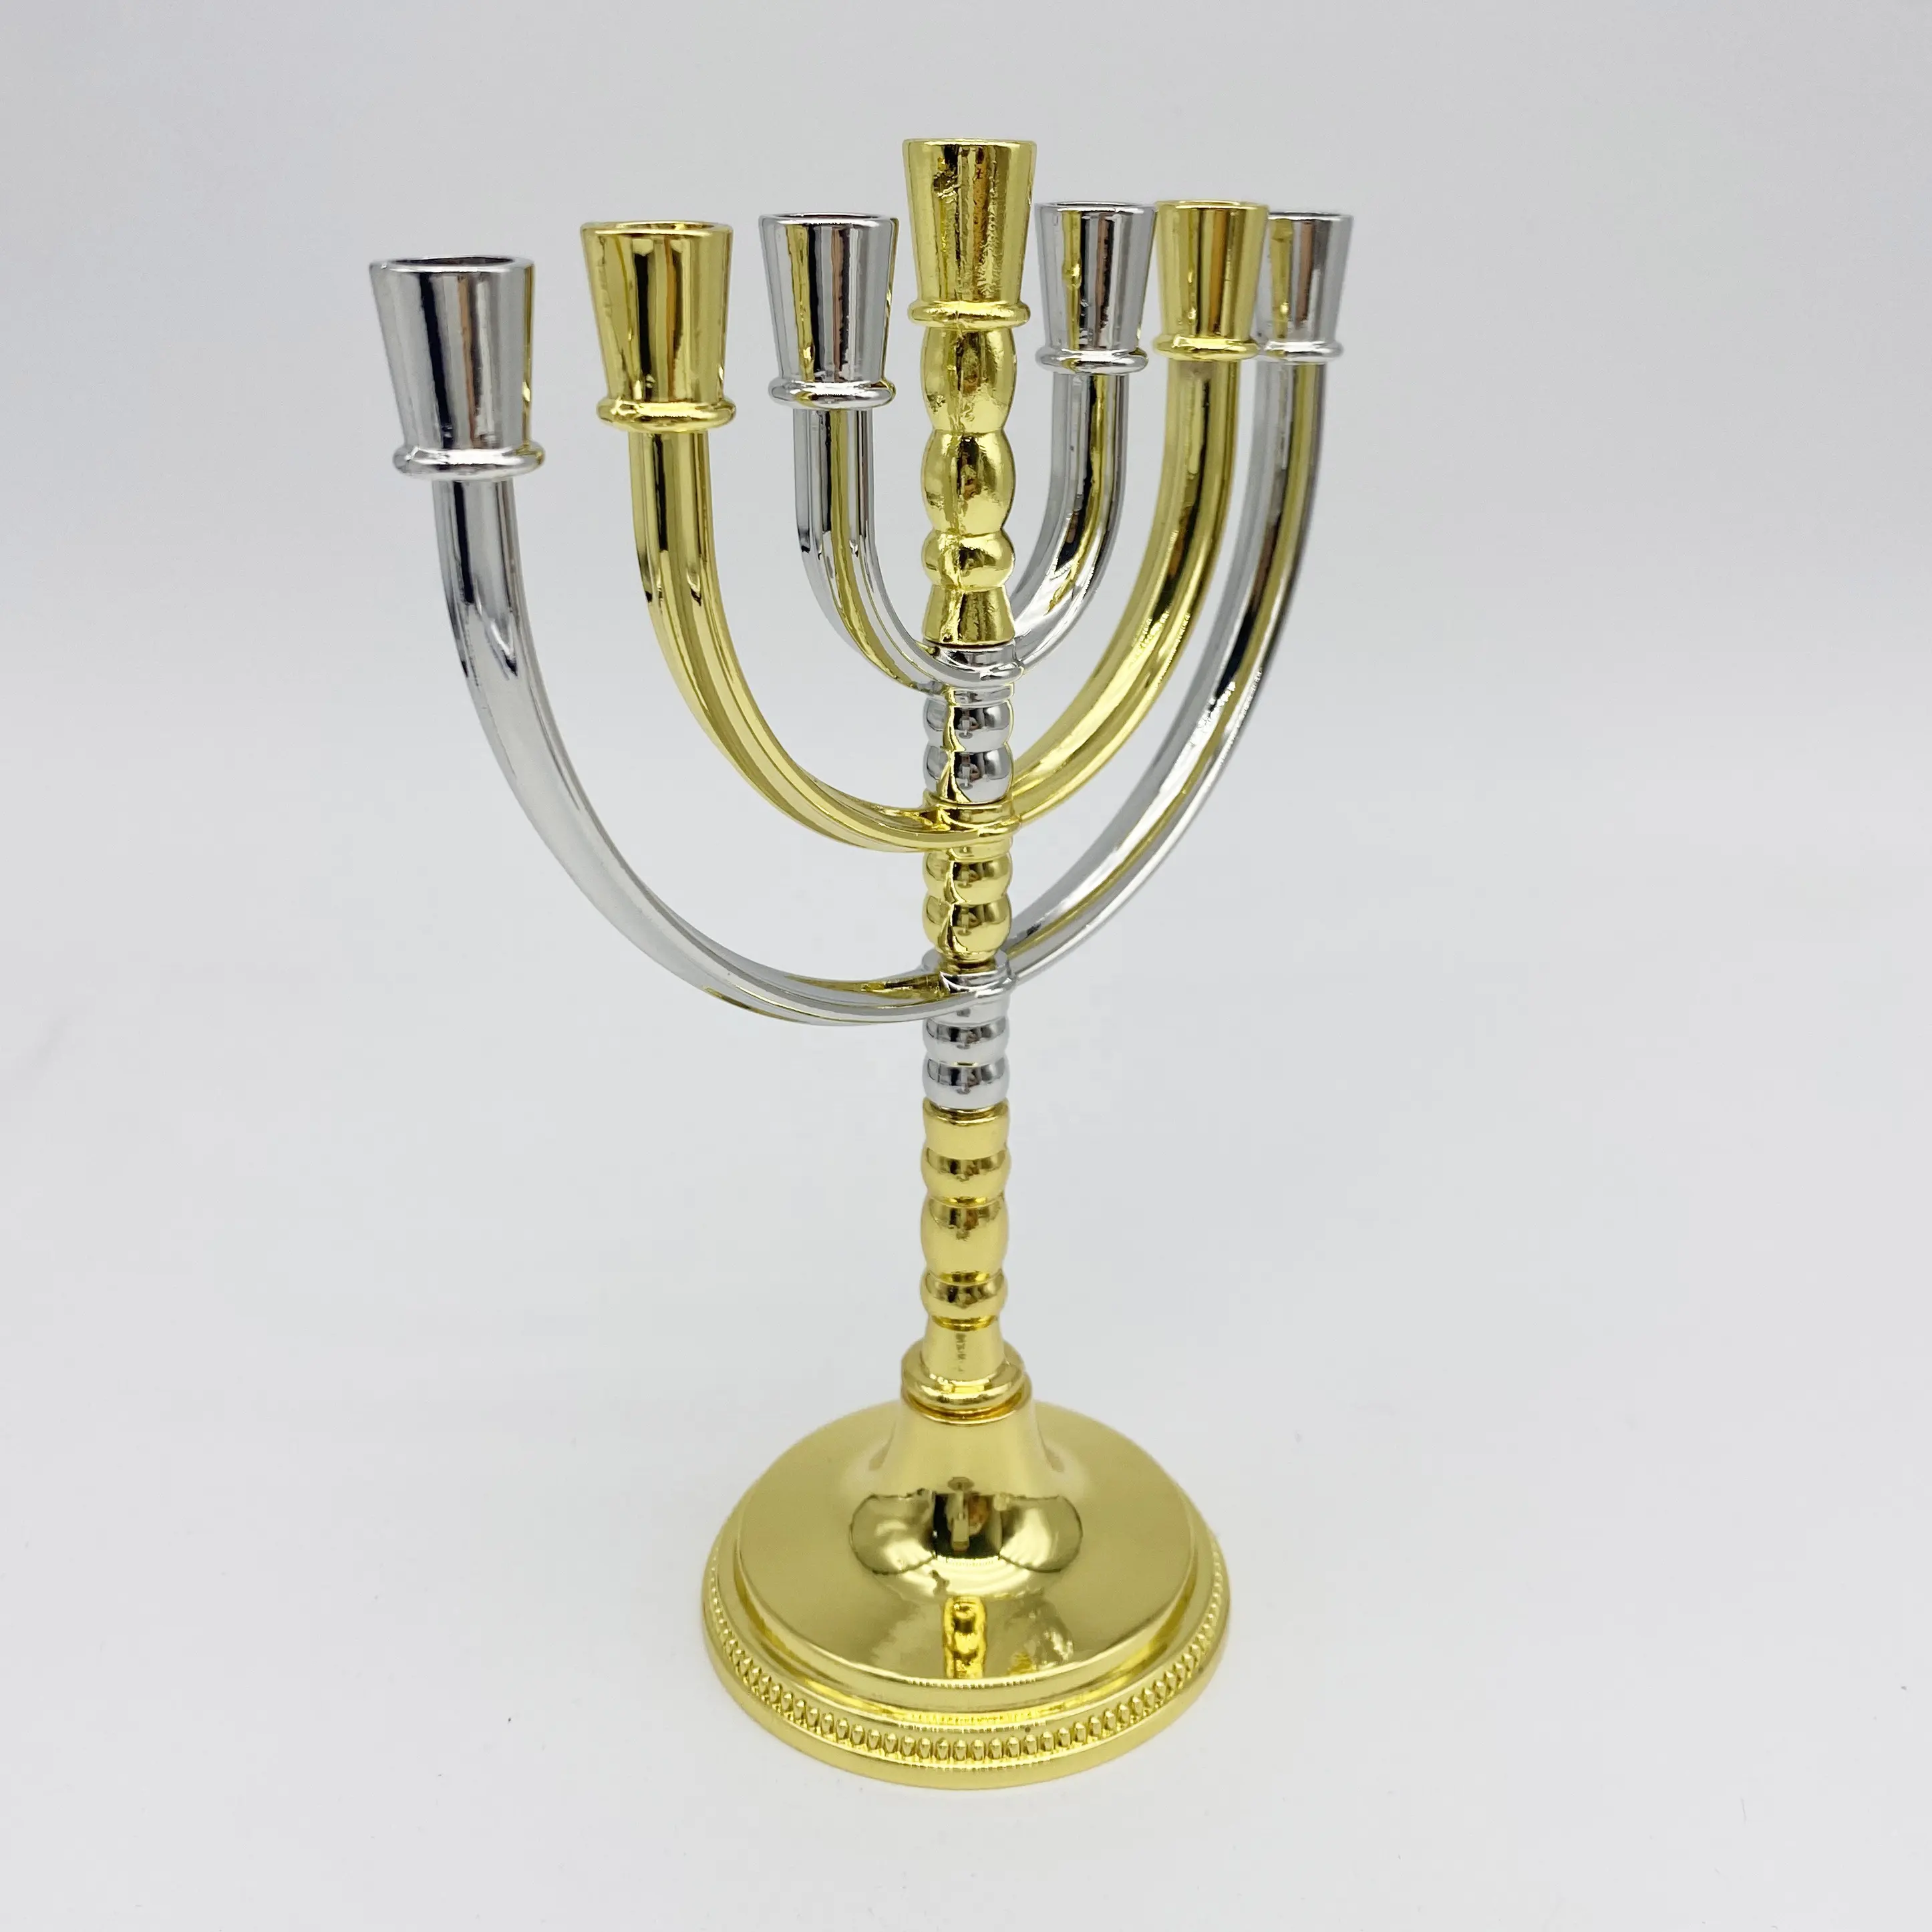 Silver and Gold 7 Branch Temple Revolving Menorah